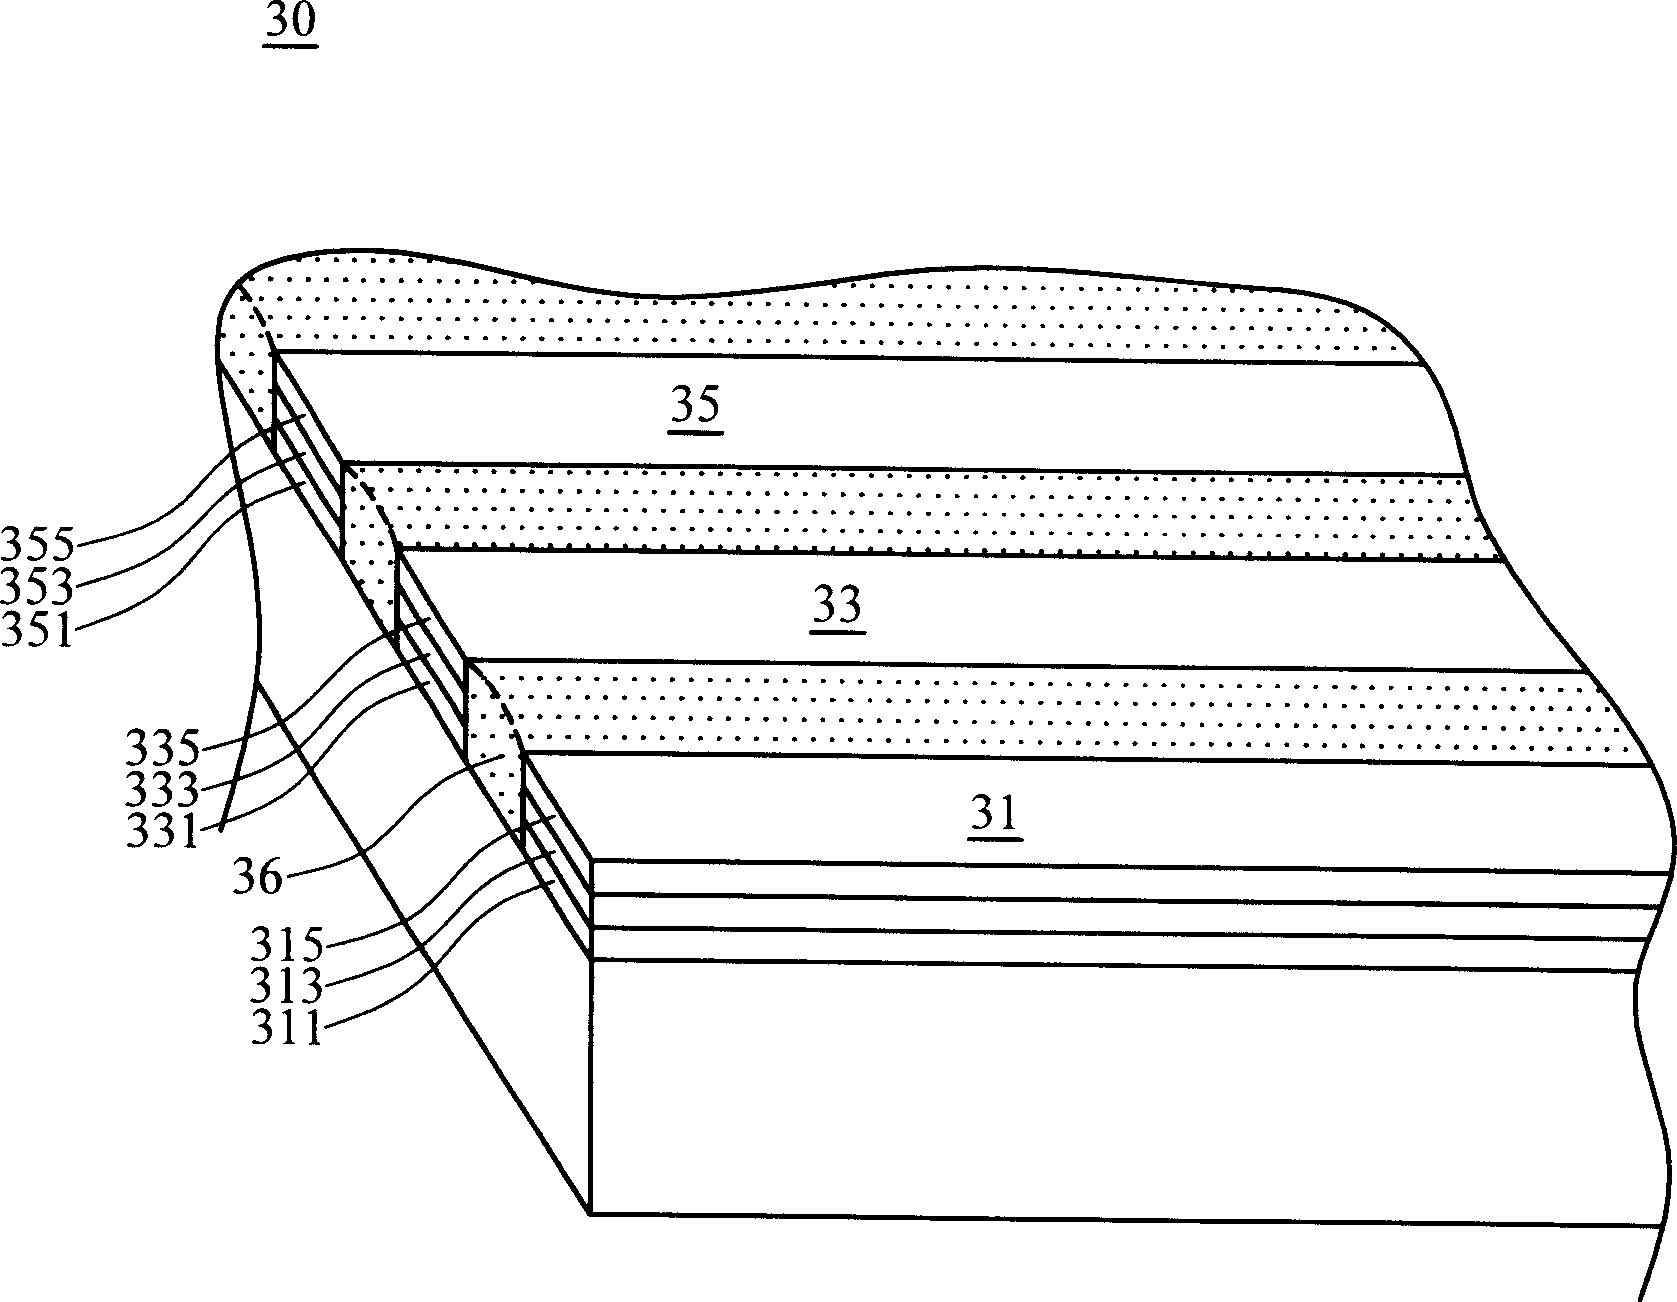 Liquid crystal display device and backlight source thereof